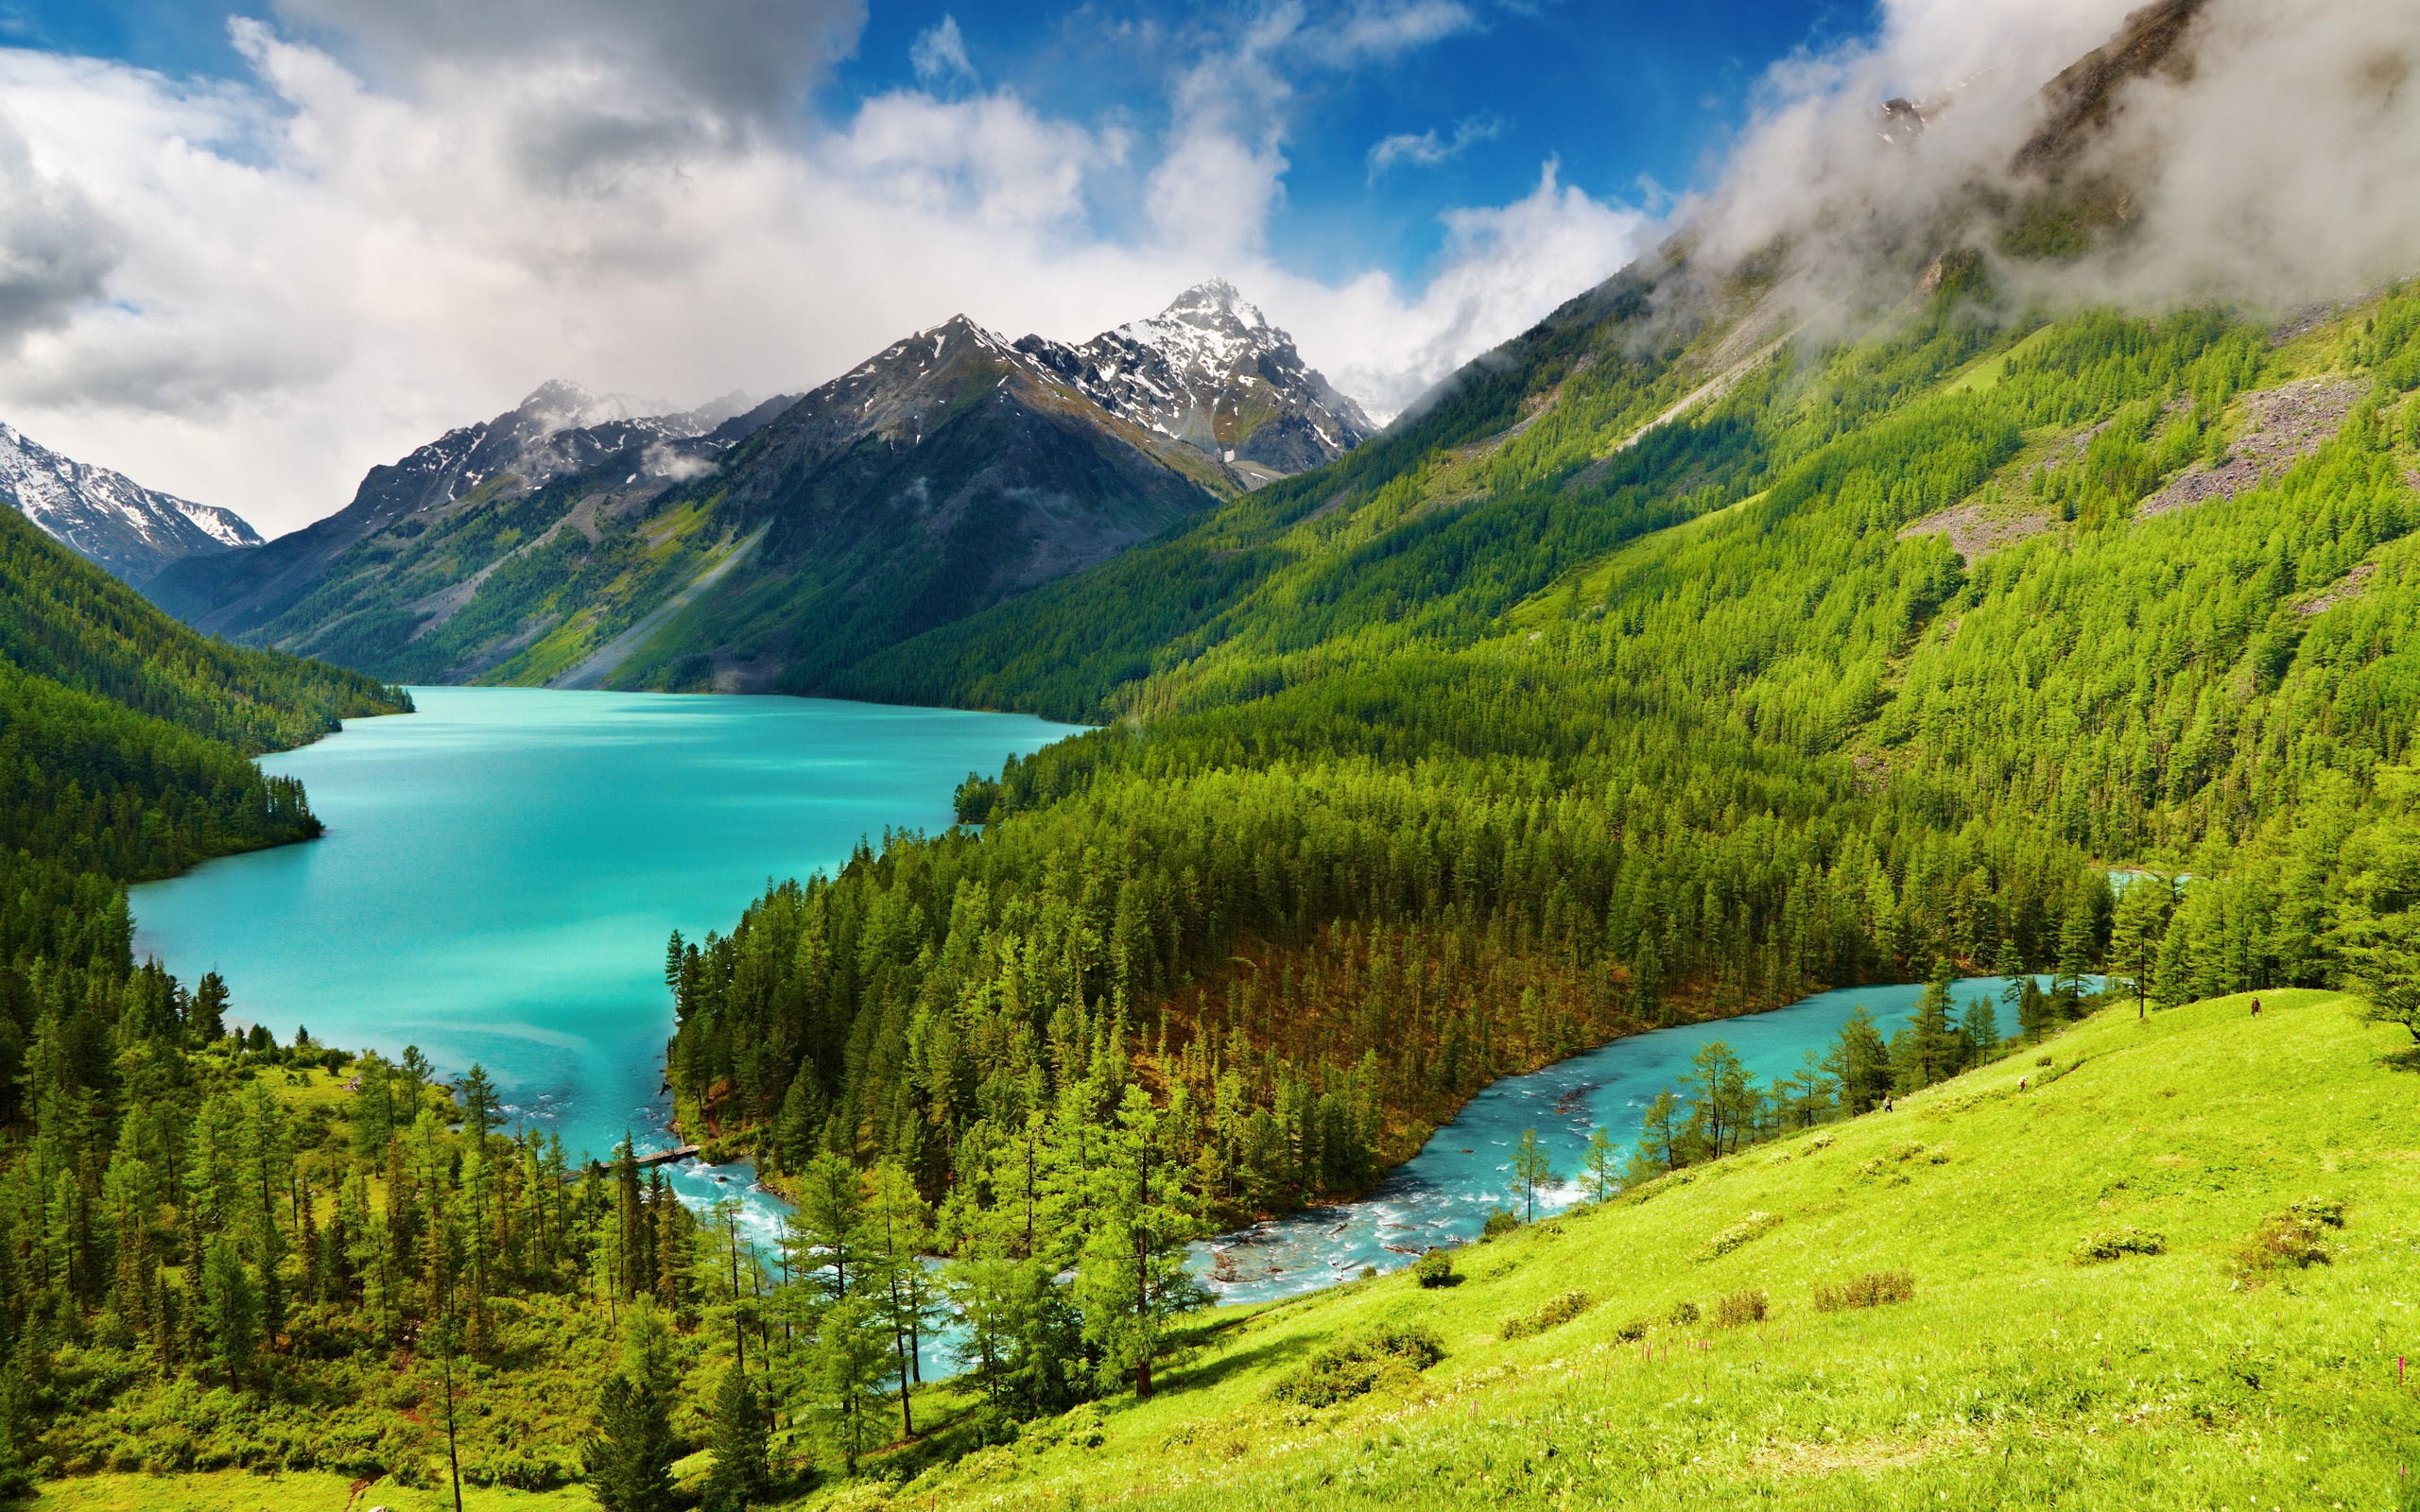 Beautiful nature scenery, green, trees, lake, river, mountains, clouds